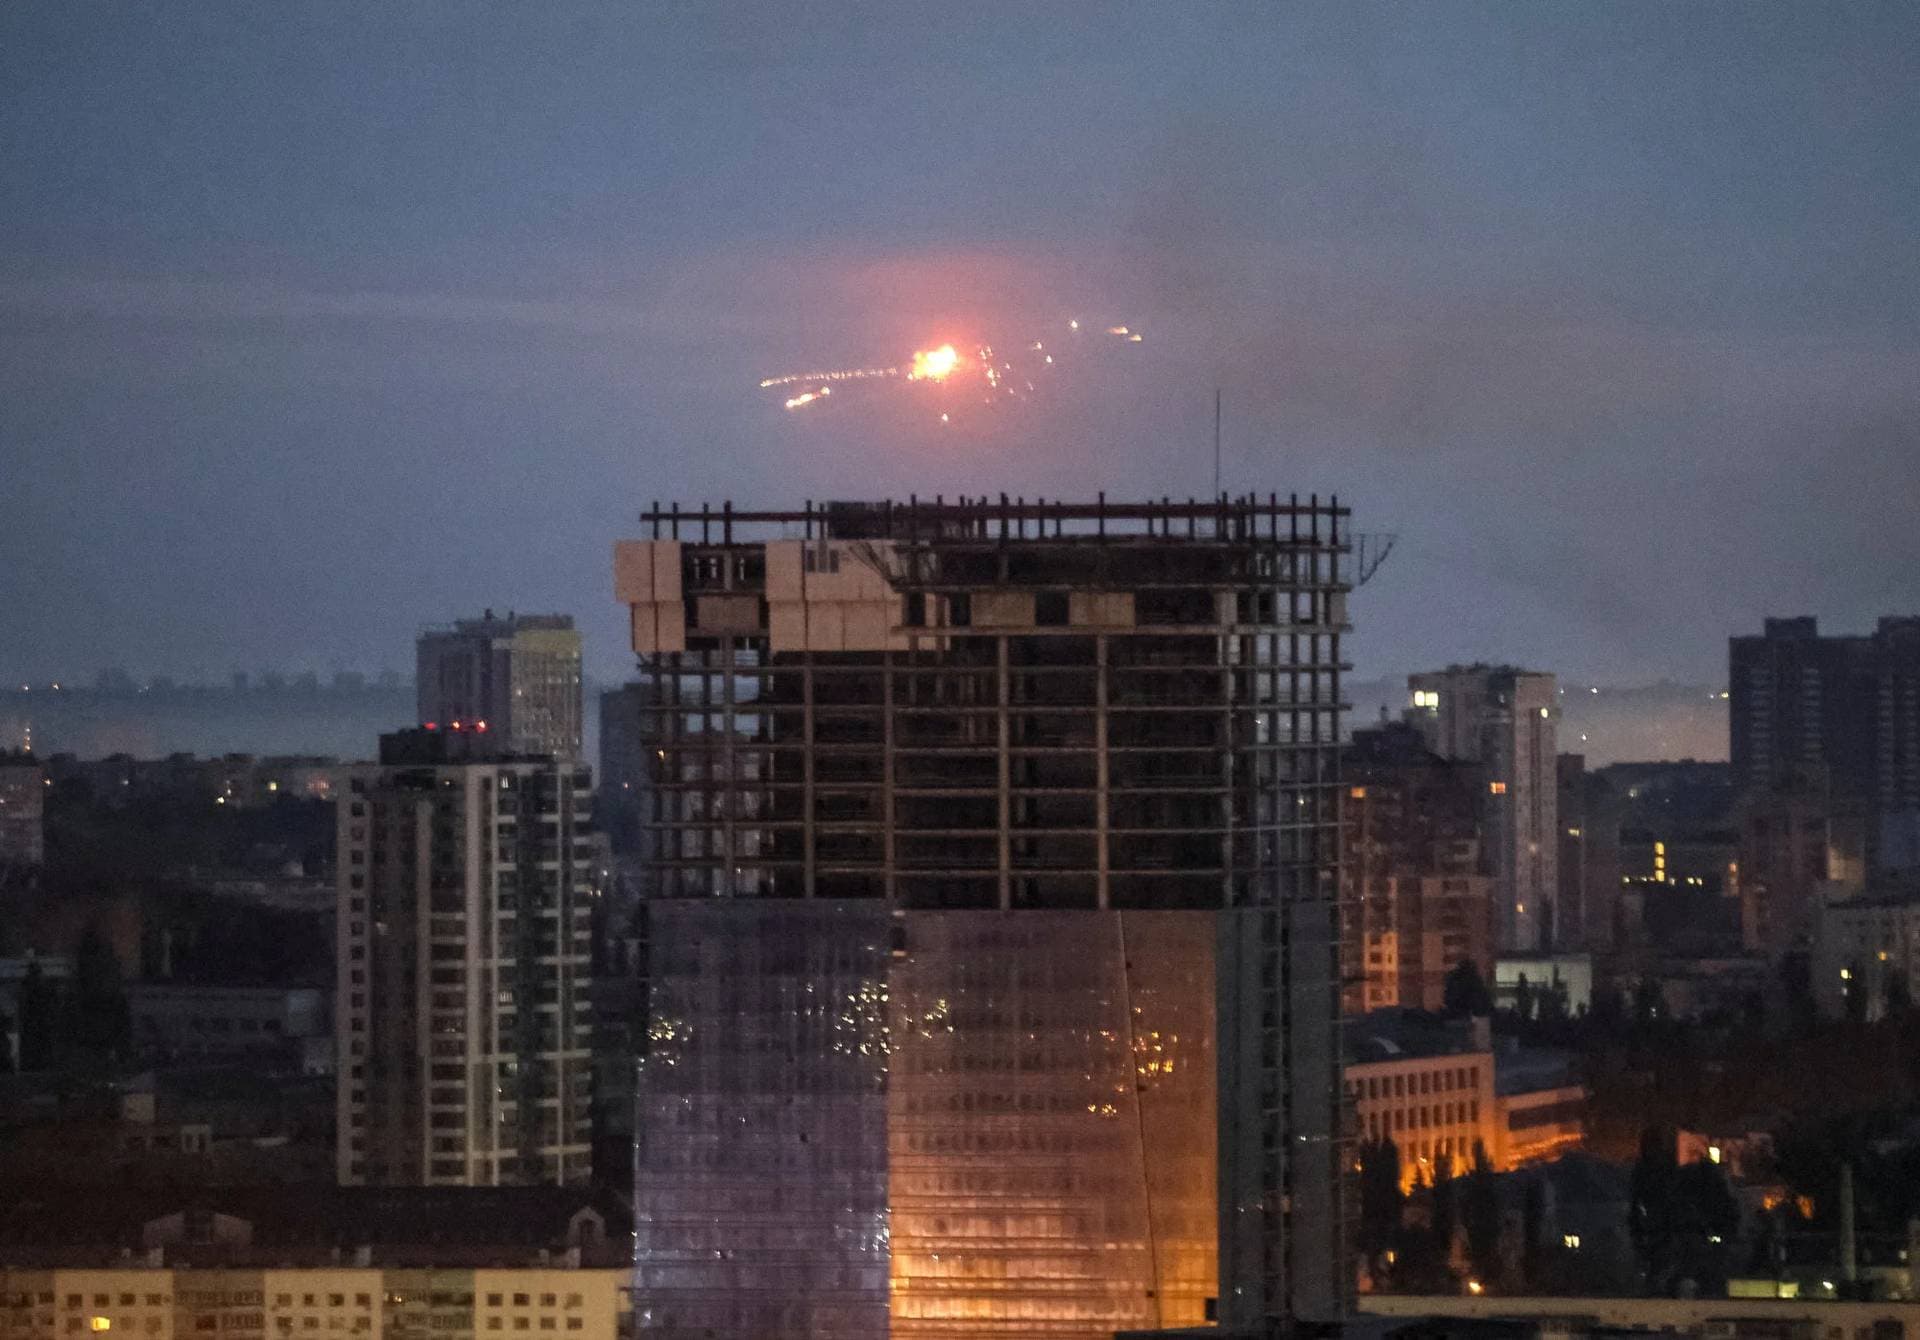 Loud explosions were seen in the sky over Kyiv as dawn was breaking